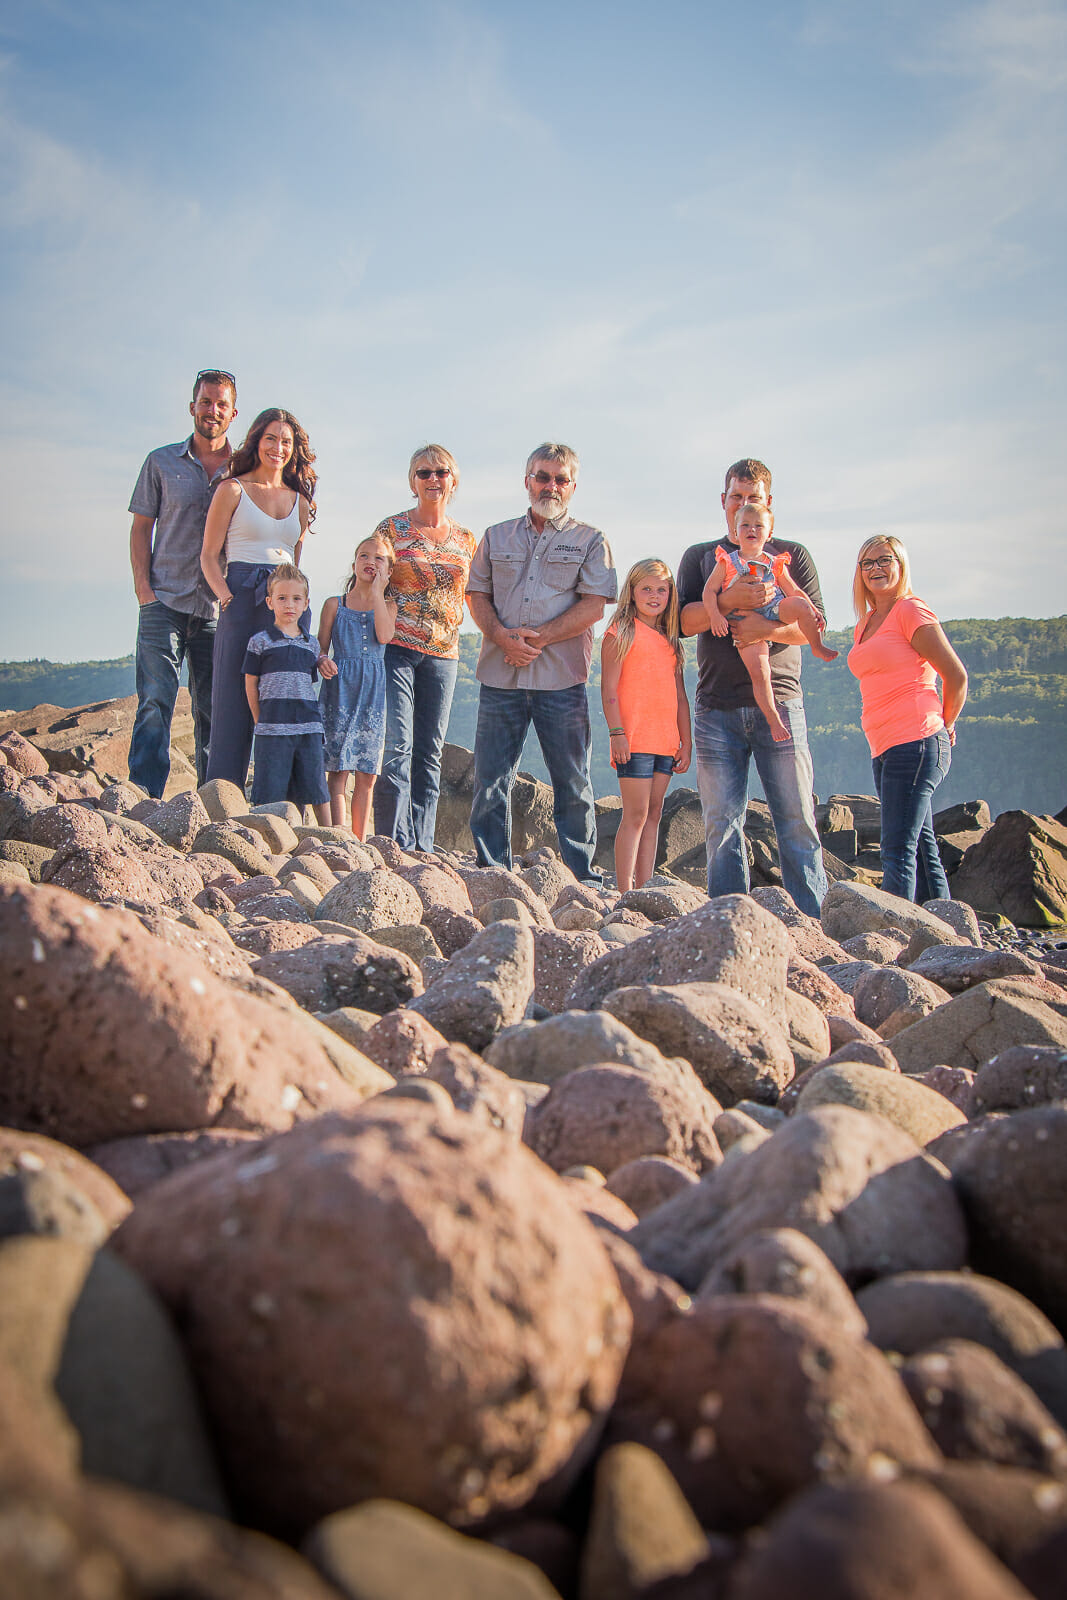 A photo from the Morrison family's Reunion, shot in Victoria Beach, Nova Scotia on a beautiful sunny day